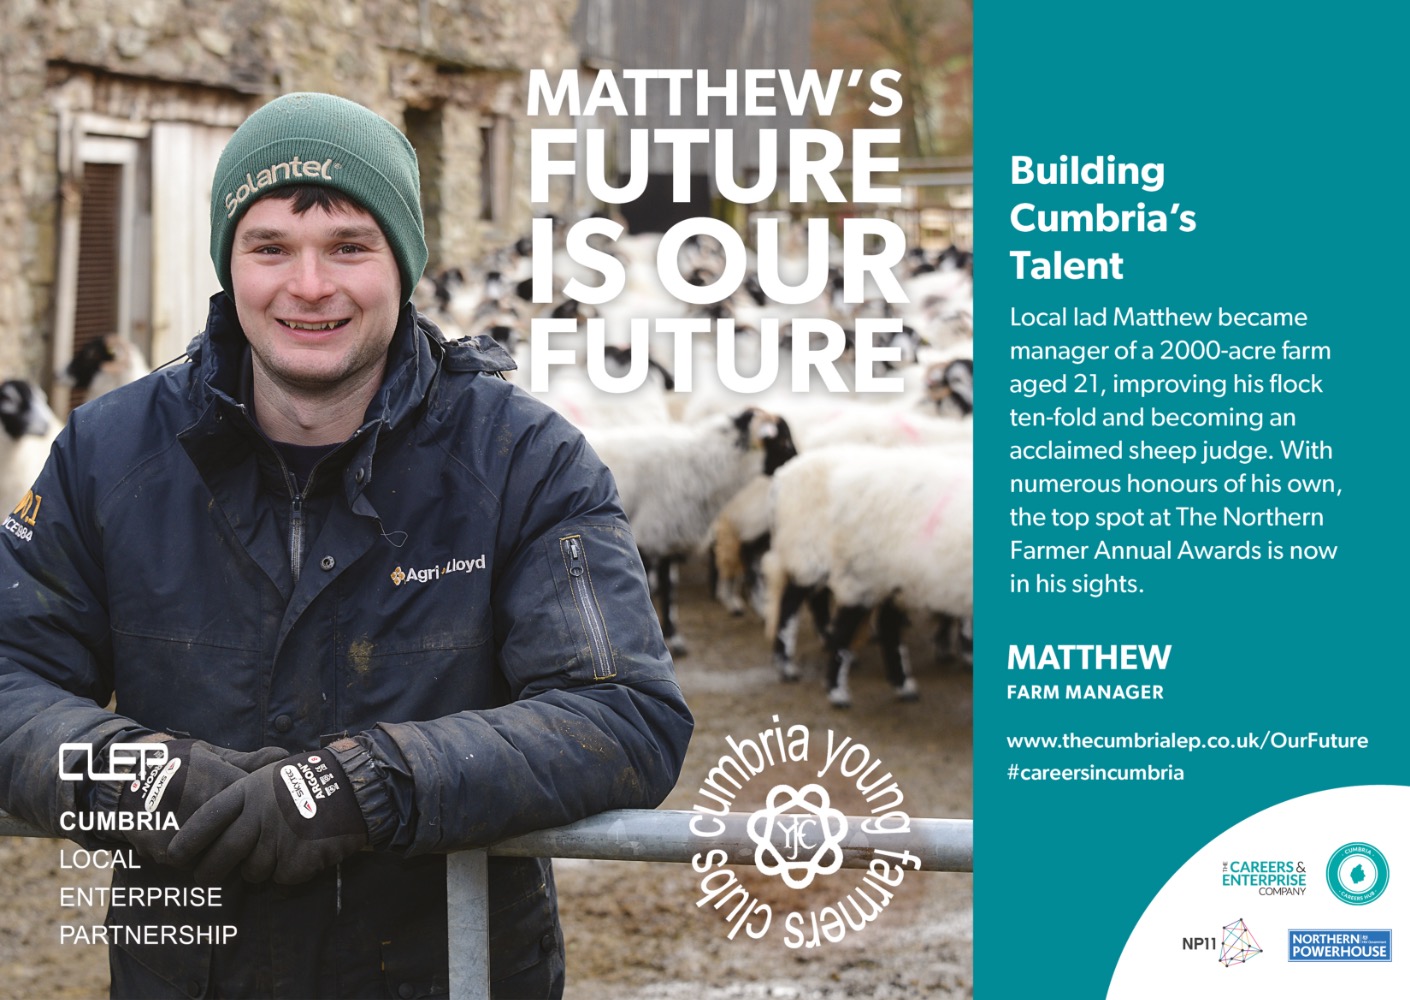 Building Cumbria's Talent - Local lad Matthew became manager of a 2,000-acre farm aged 21, improving his flock ten-fold and becoming an acclaimed sheep judge. With numerous honours of his own, the top spot at the Northern Farmer Annual Awards is now in his sights. (Photo of Matthew, farm manager).